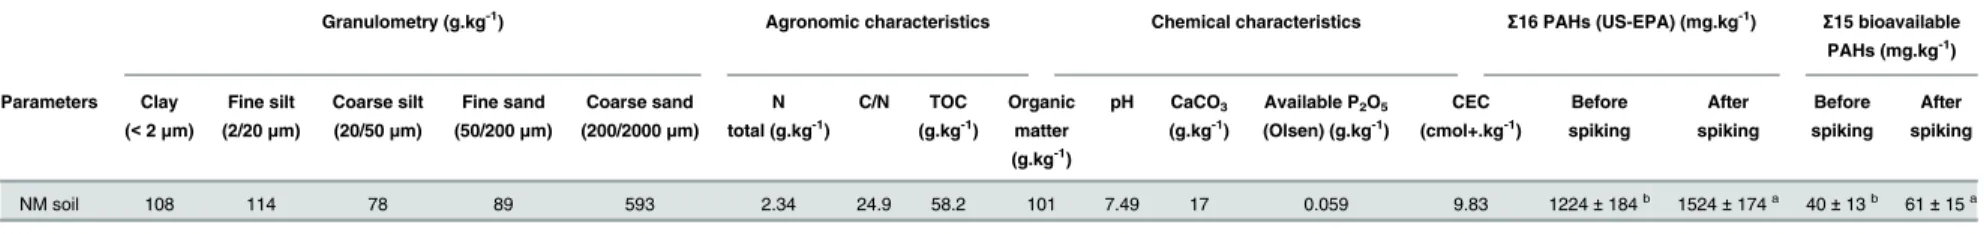 Table 1. Soil characteristics and PAH contamination. Granulometry, agronomic and chemical properties were measured at the LAS-INRA laboratory (Arras, France)